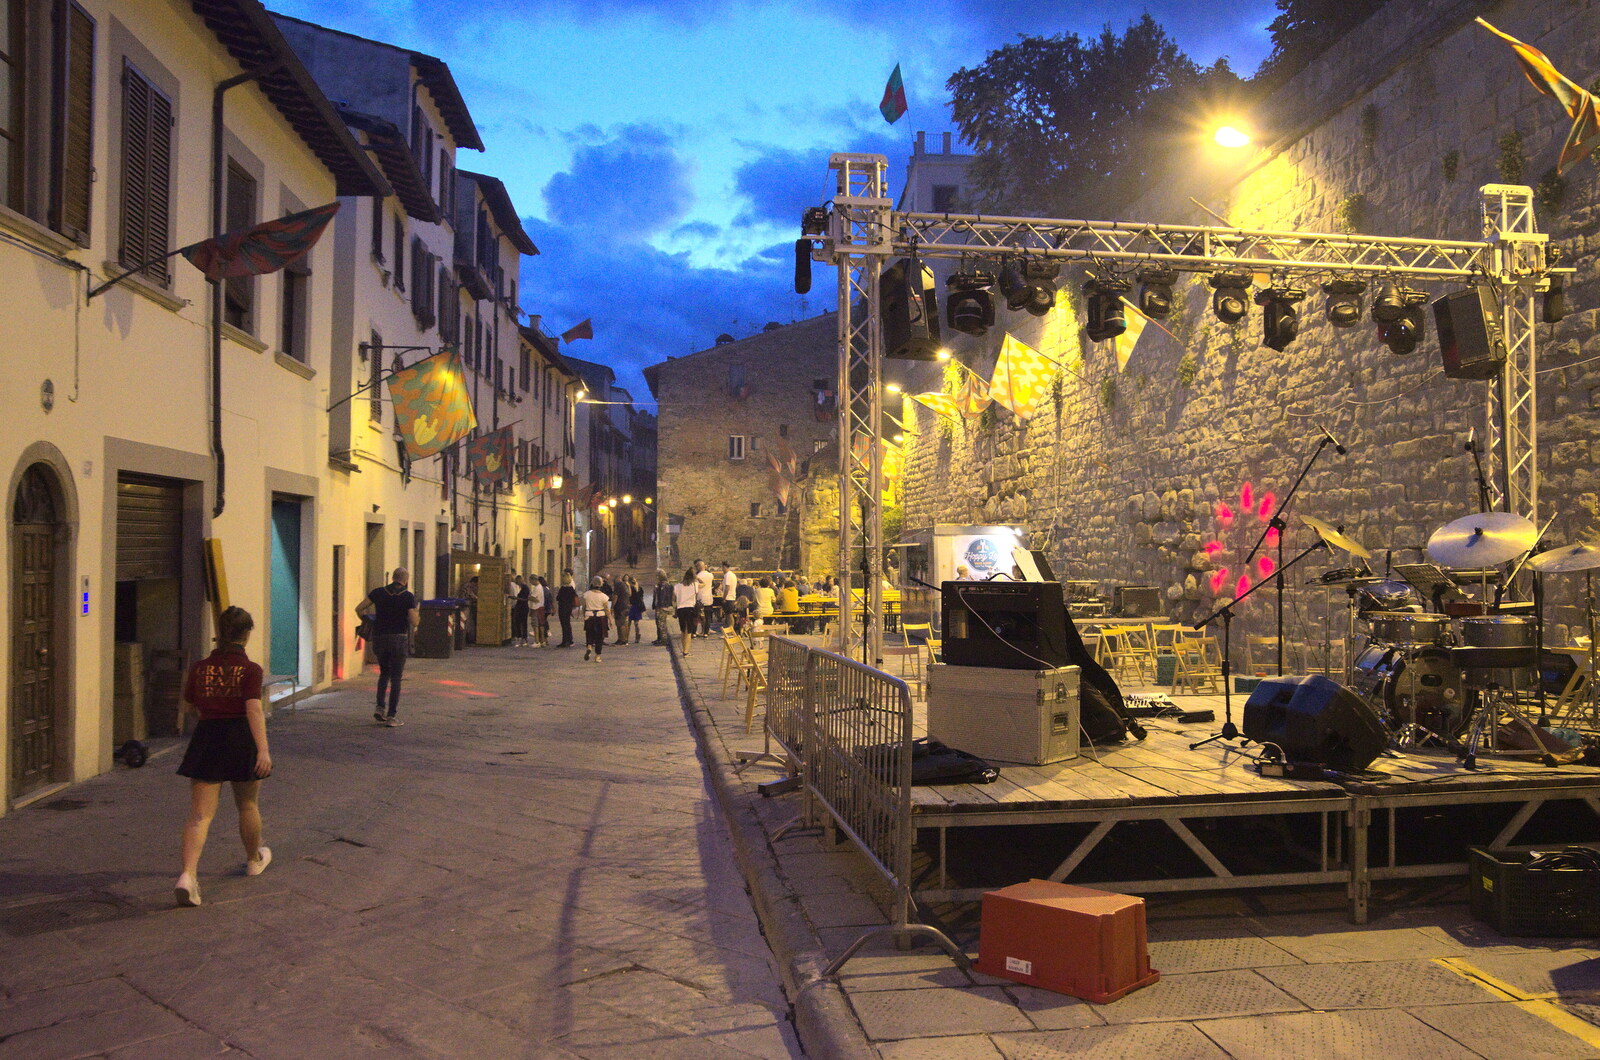 A Day by the Pool and a Festival Rehearsal, Arezzo, Italy - 3rd September 2022: A stage is set up on Via Colcitrone